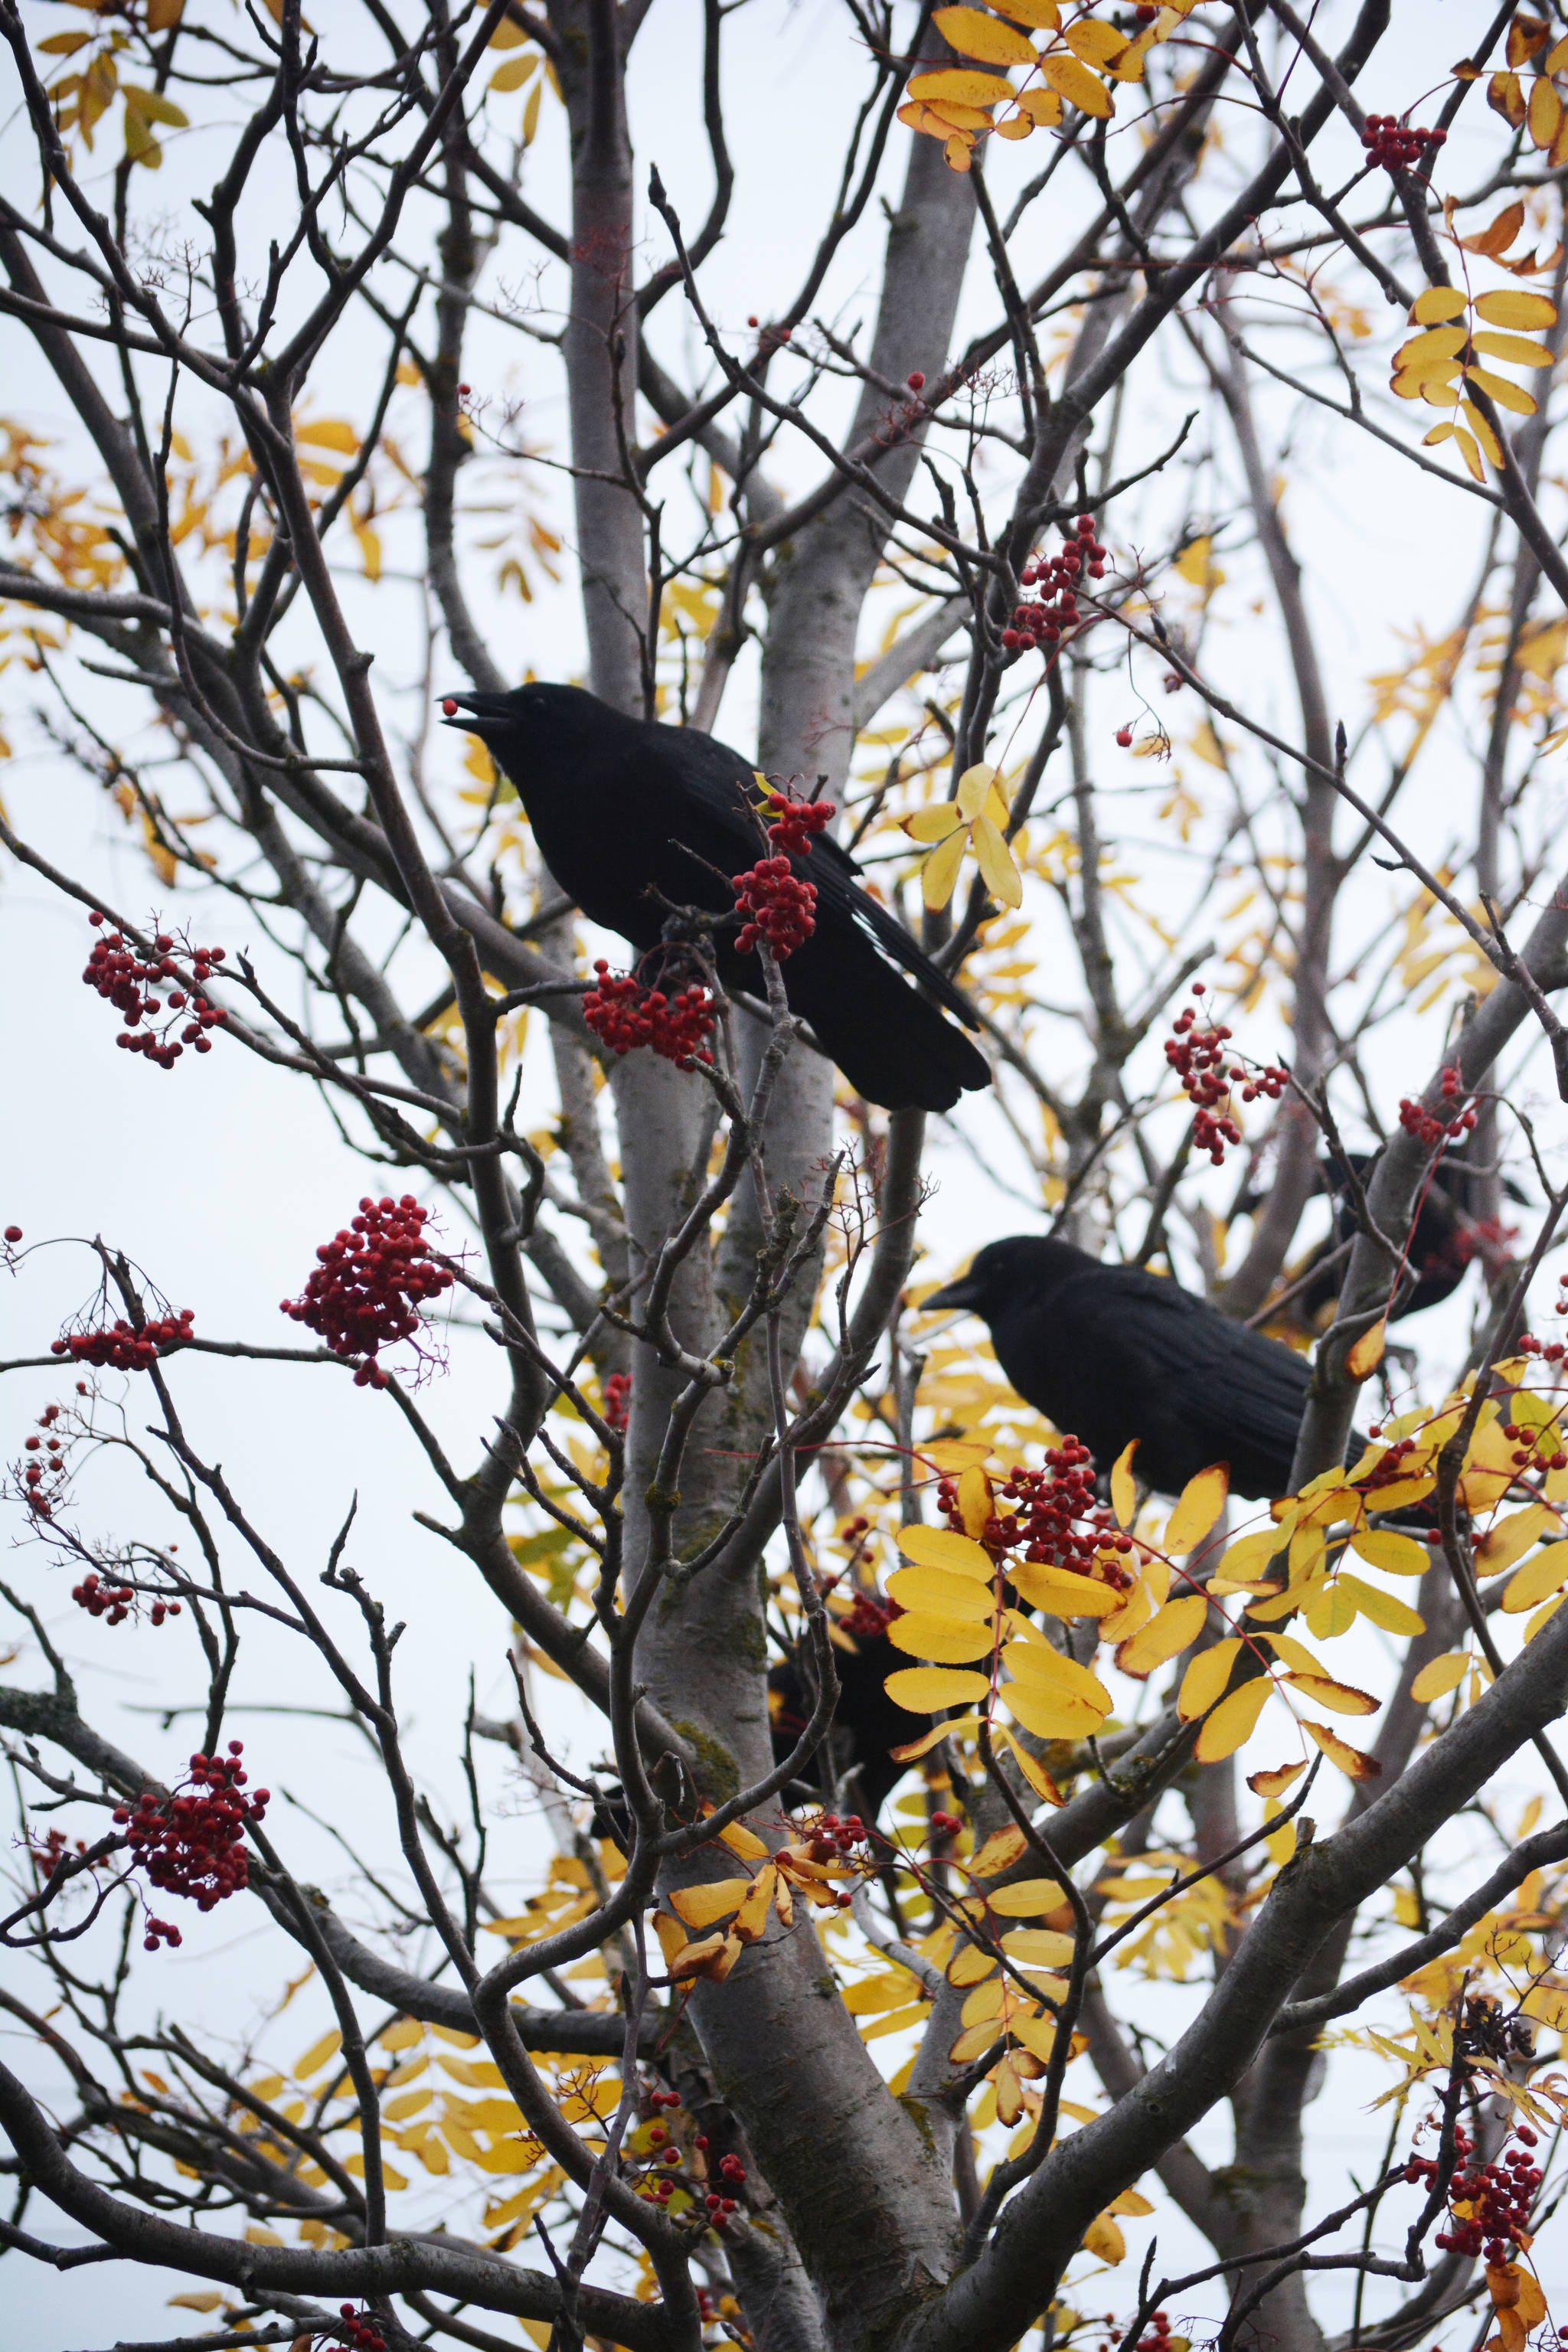 Crows feed on mountain ash berries along Lake Street on Tuesday afternoon, Oct. 9, 2018, in Homer, Alaska. (Photo by Michael Armstrong/Homer News)